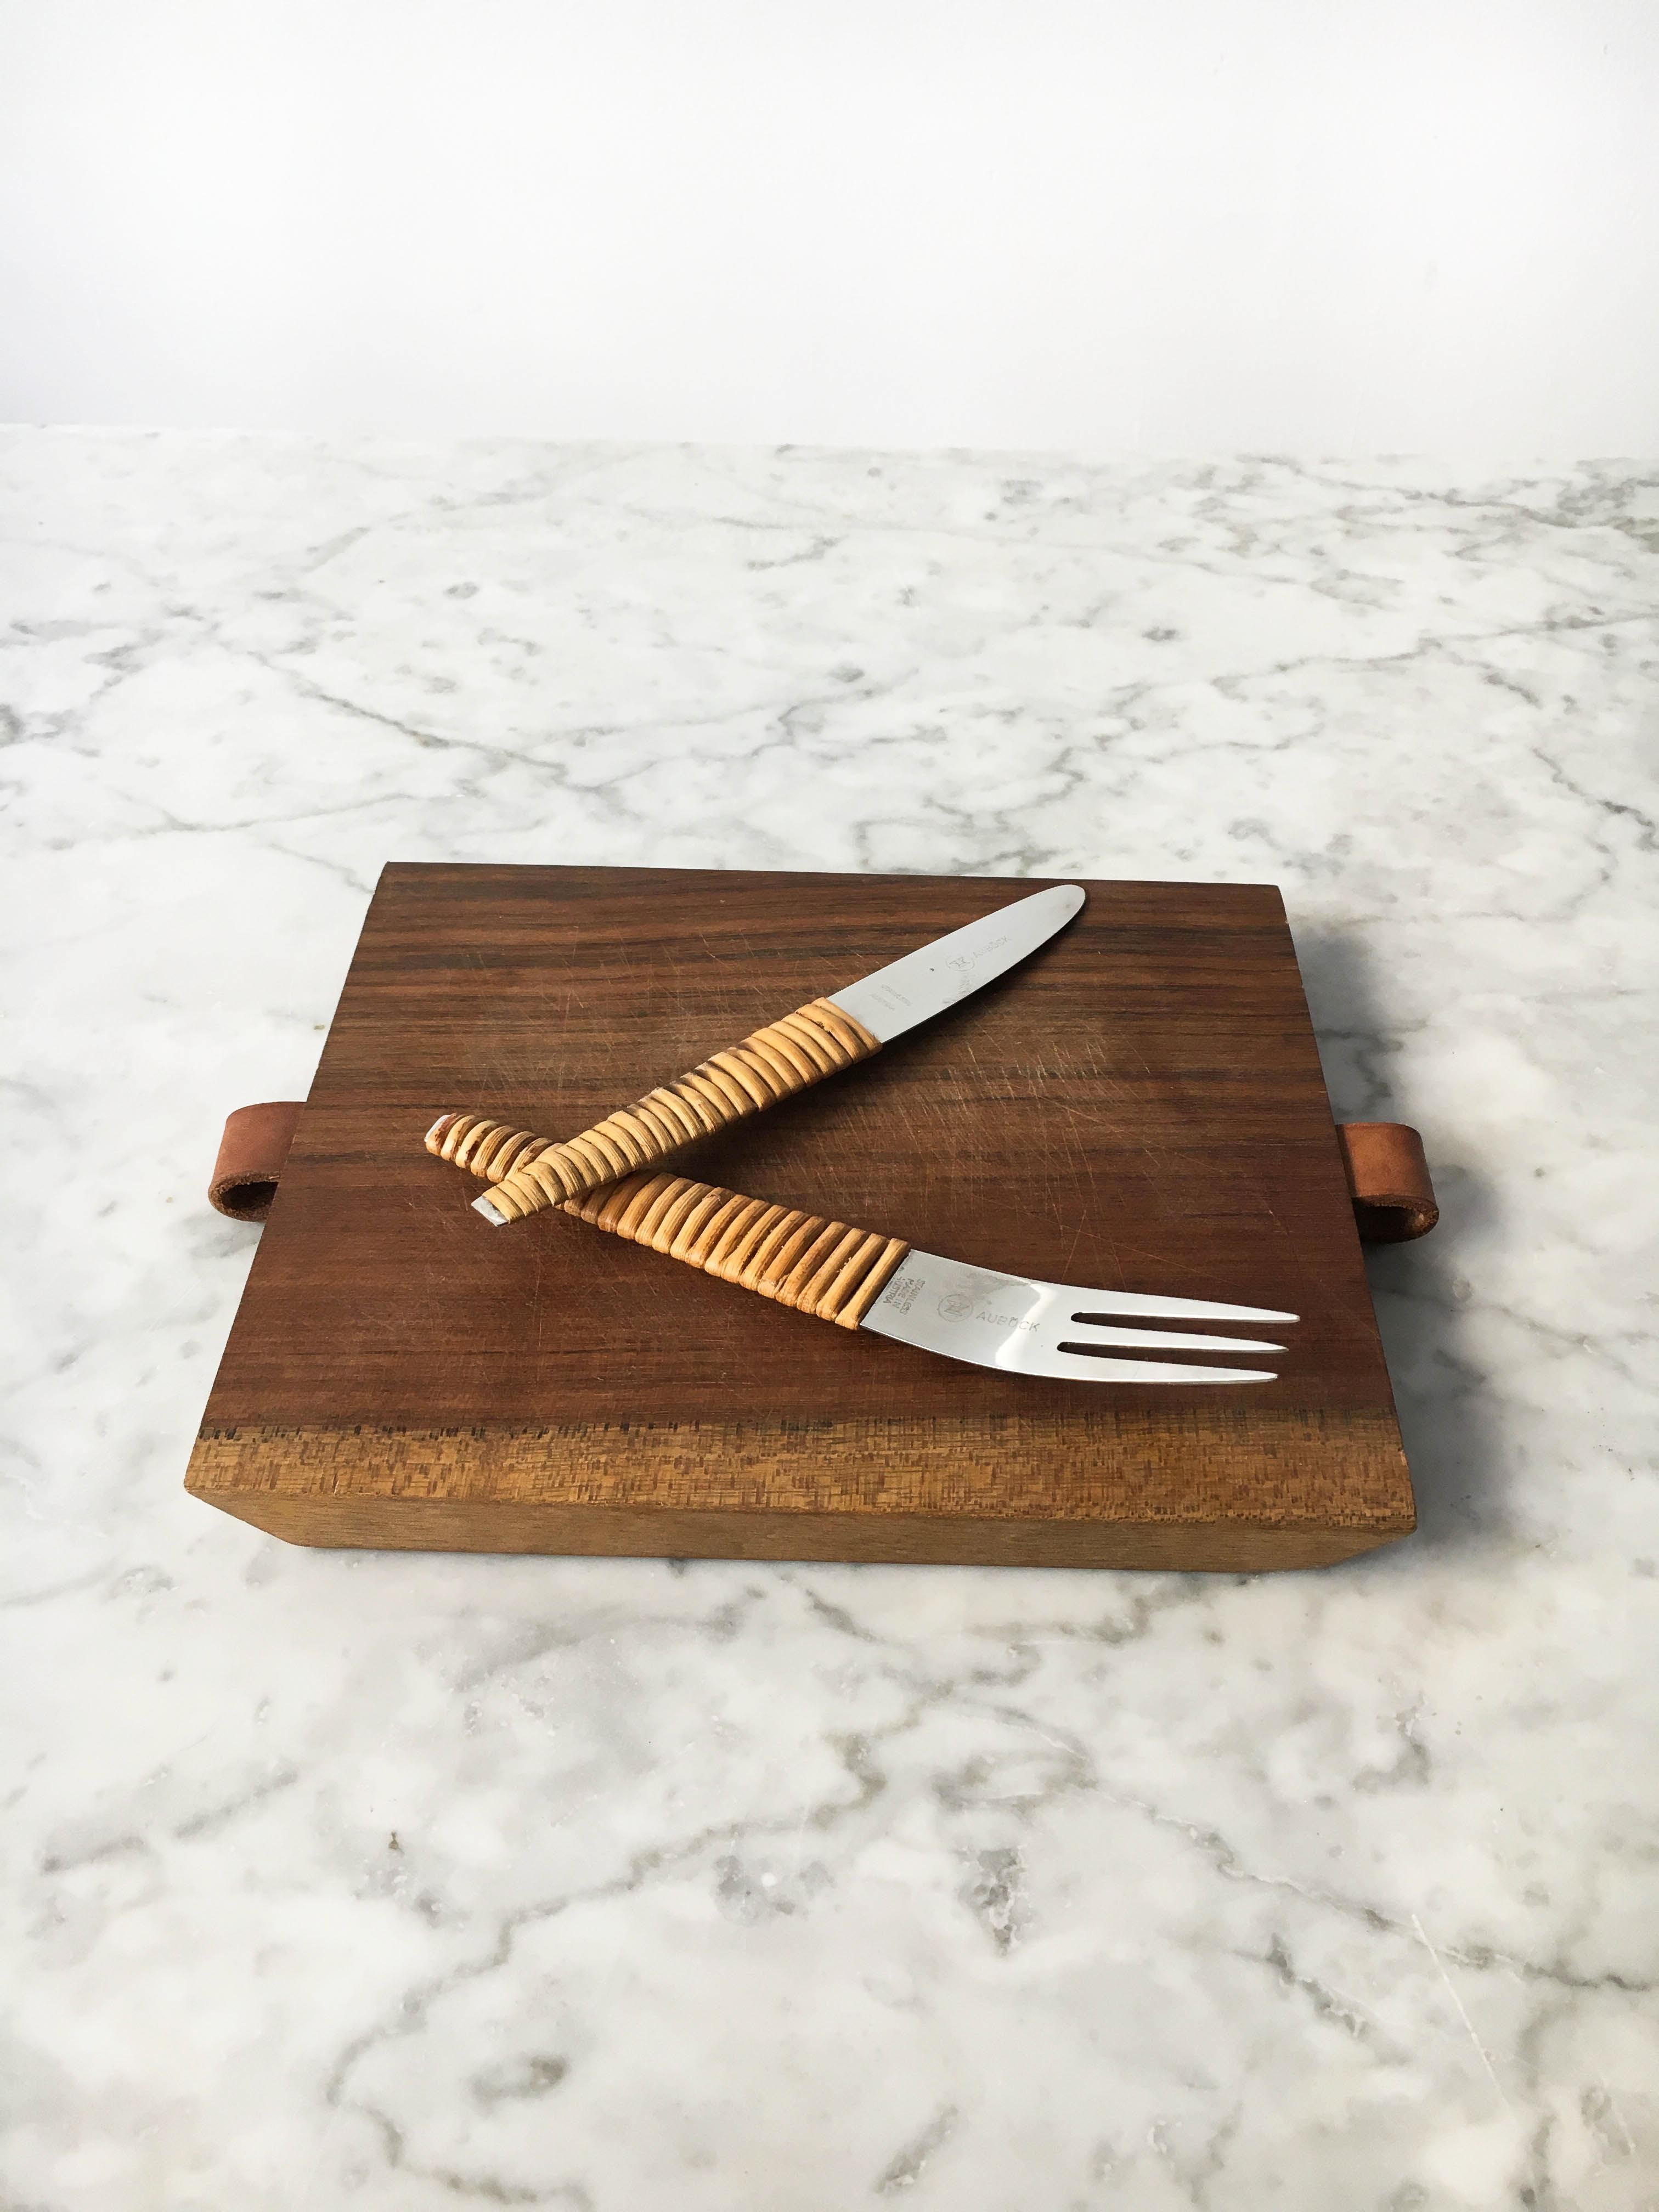 Carl Auböck Pic-Nick Board with Knife and Fork, Austria, 1950s For Sale 2